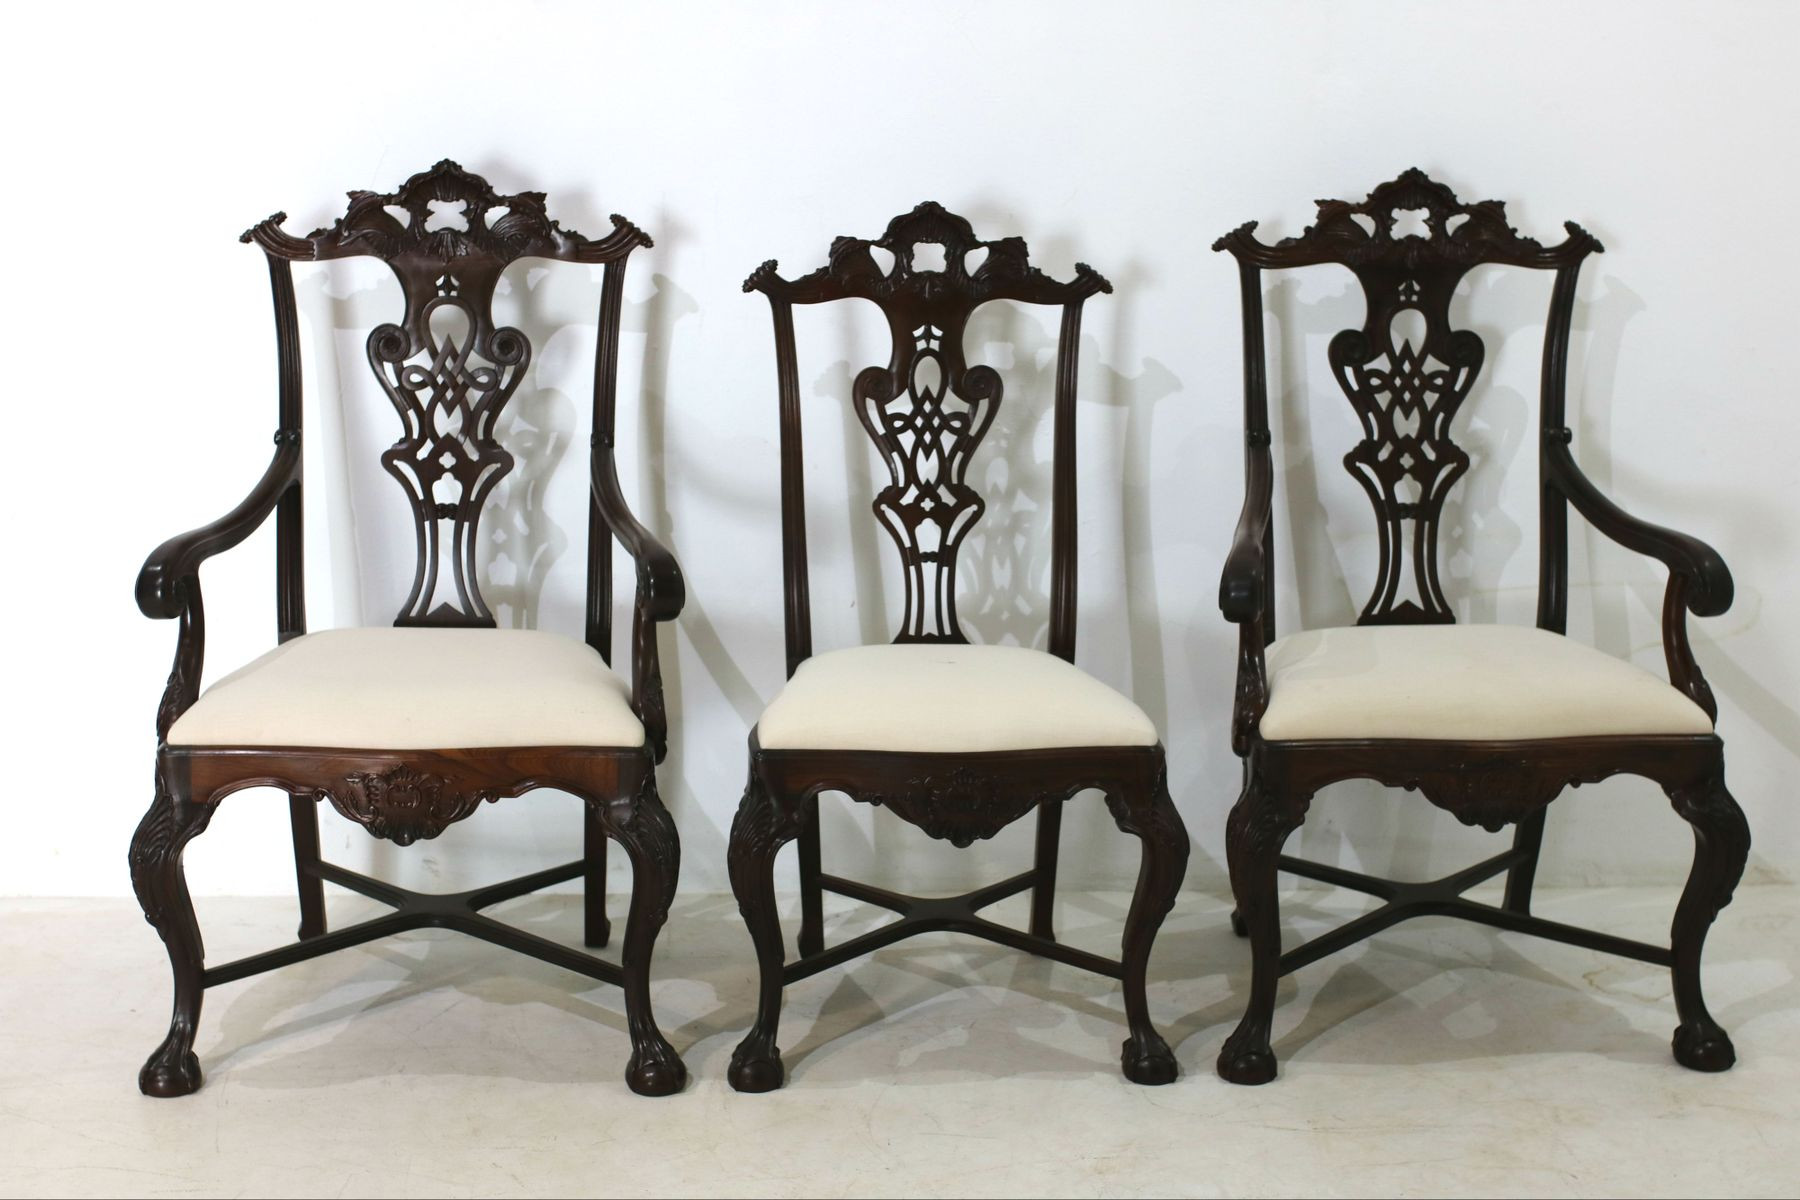 11 Unique Chinese Rosewood Vase Stands 2024 free download chinese rosewood vase stands of vintage portuguese rosewood chairs set of 8 for sale at pamono throughout vintage portuguese rosewood chairs set of 8